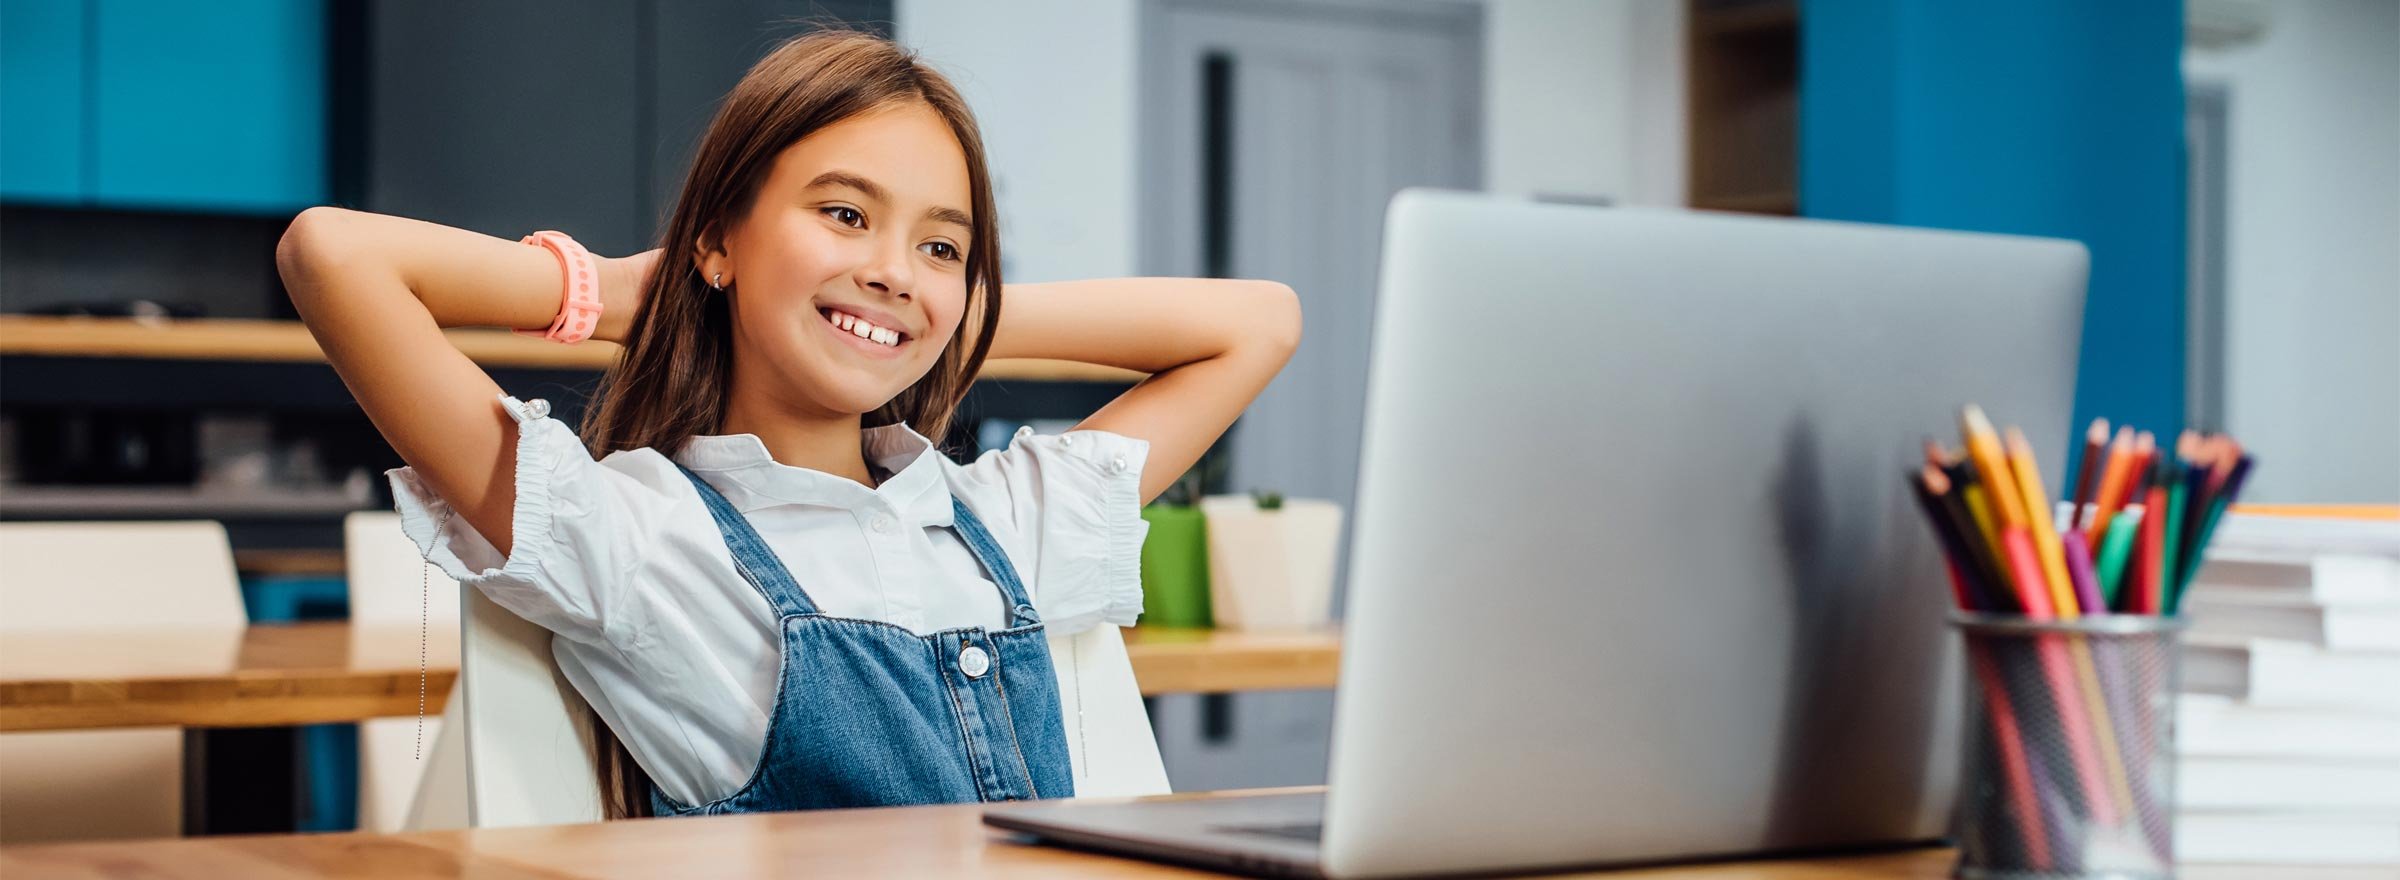 girl leaning back and smiling at a computer screen